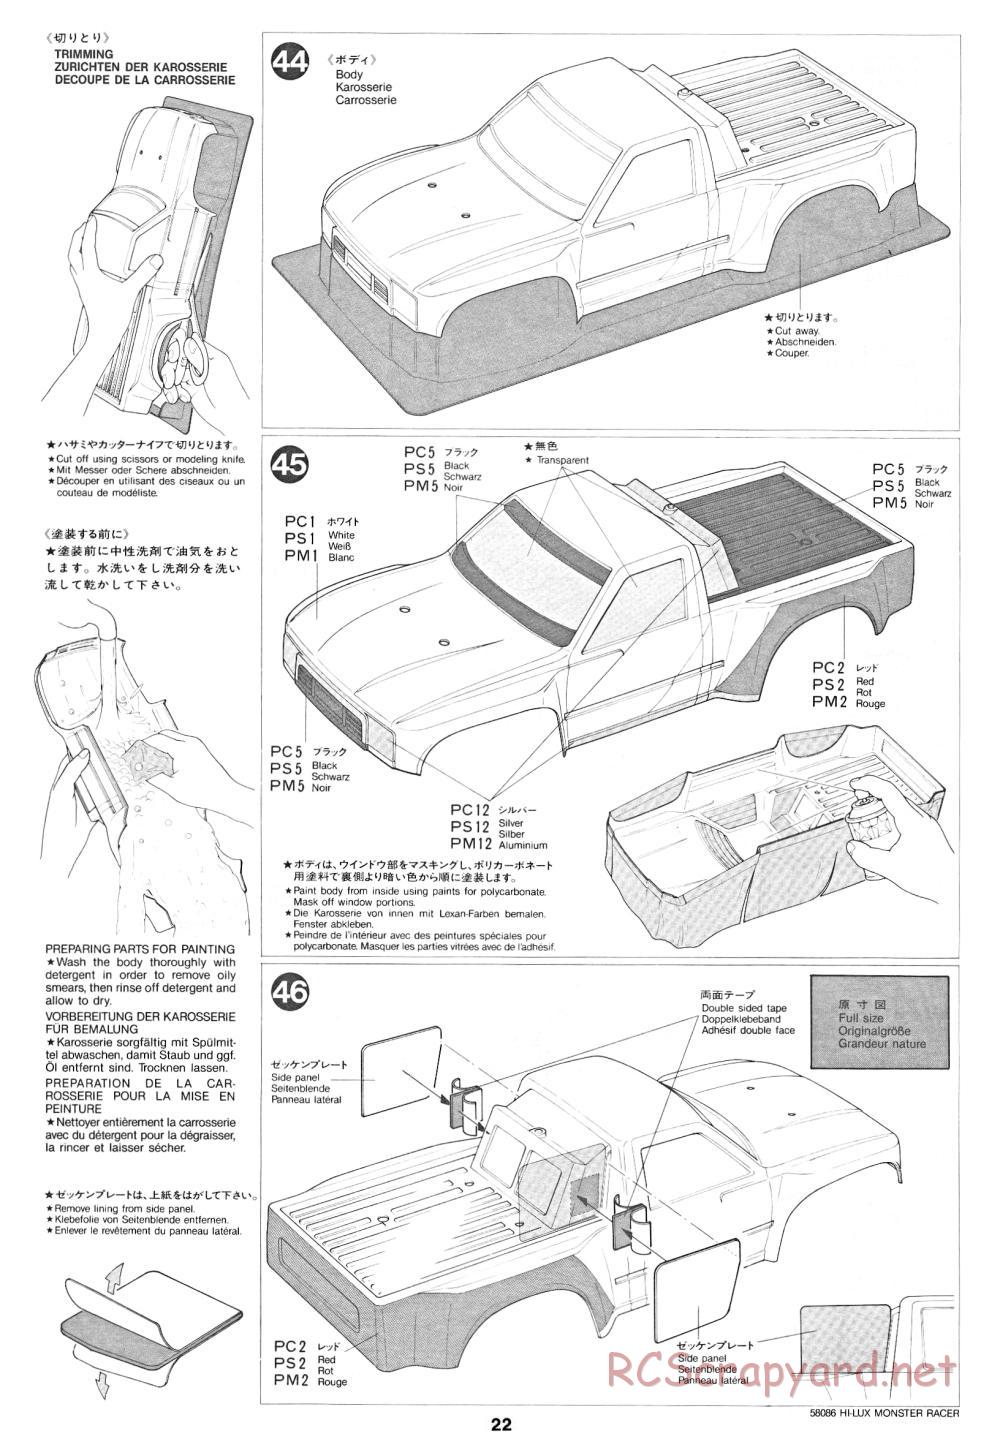 Tamiya - Toyota Hilux Monster Racer - 58086 - Manual - Page 22